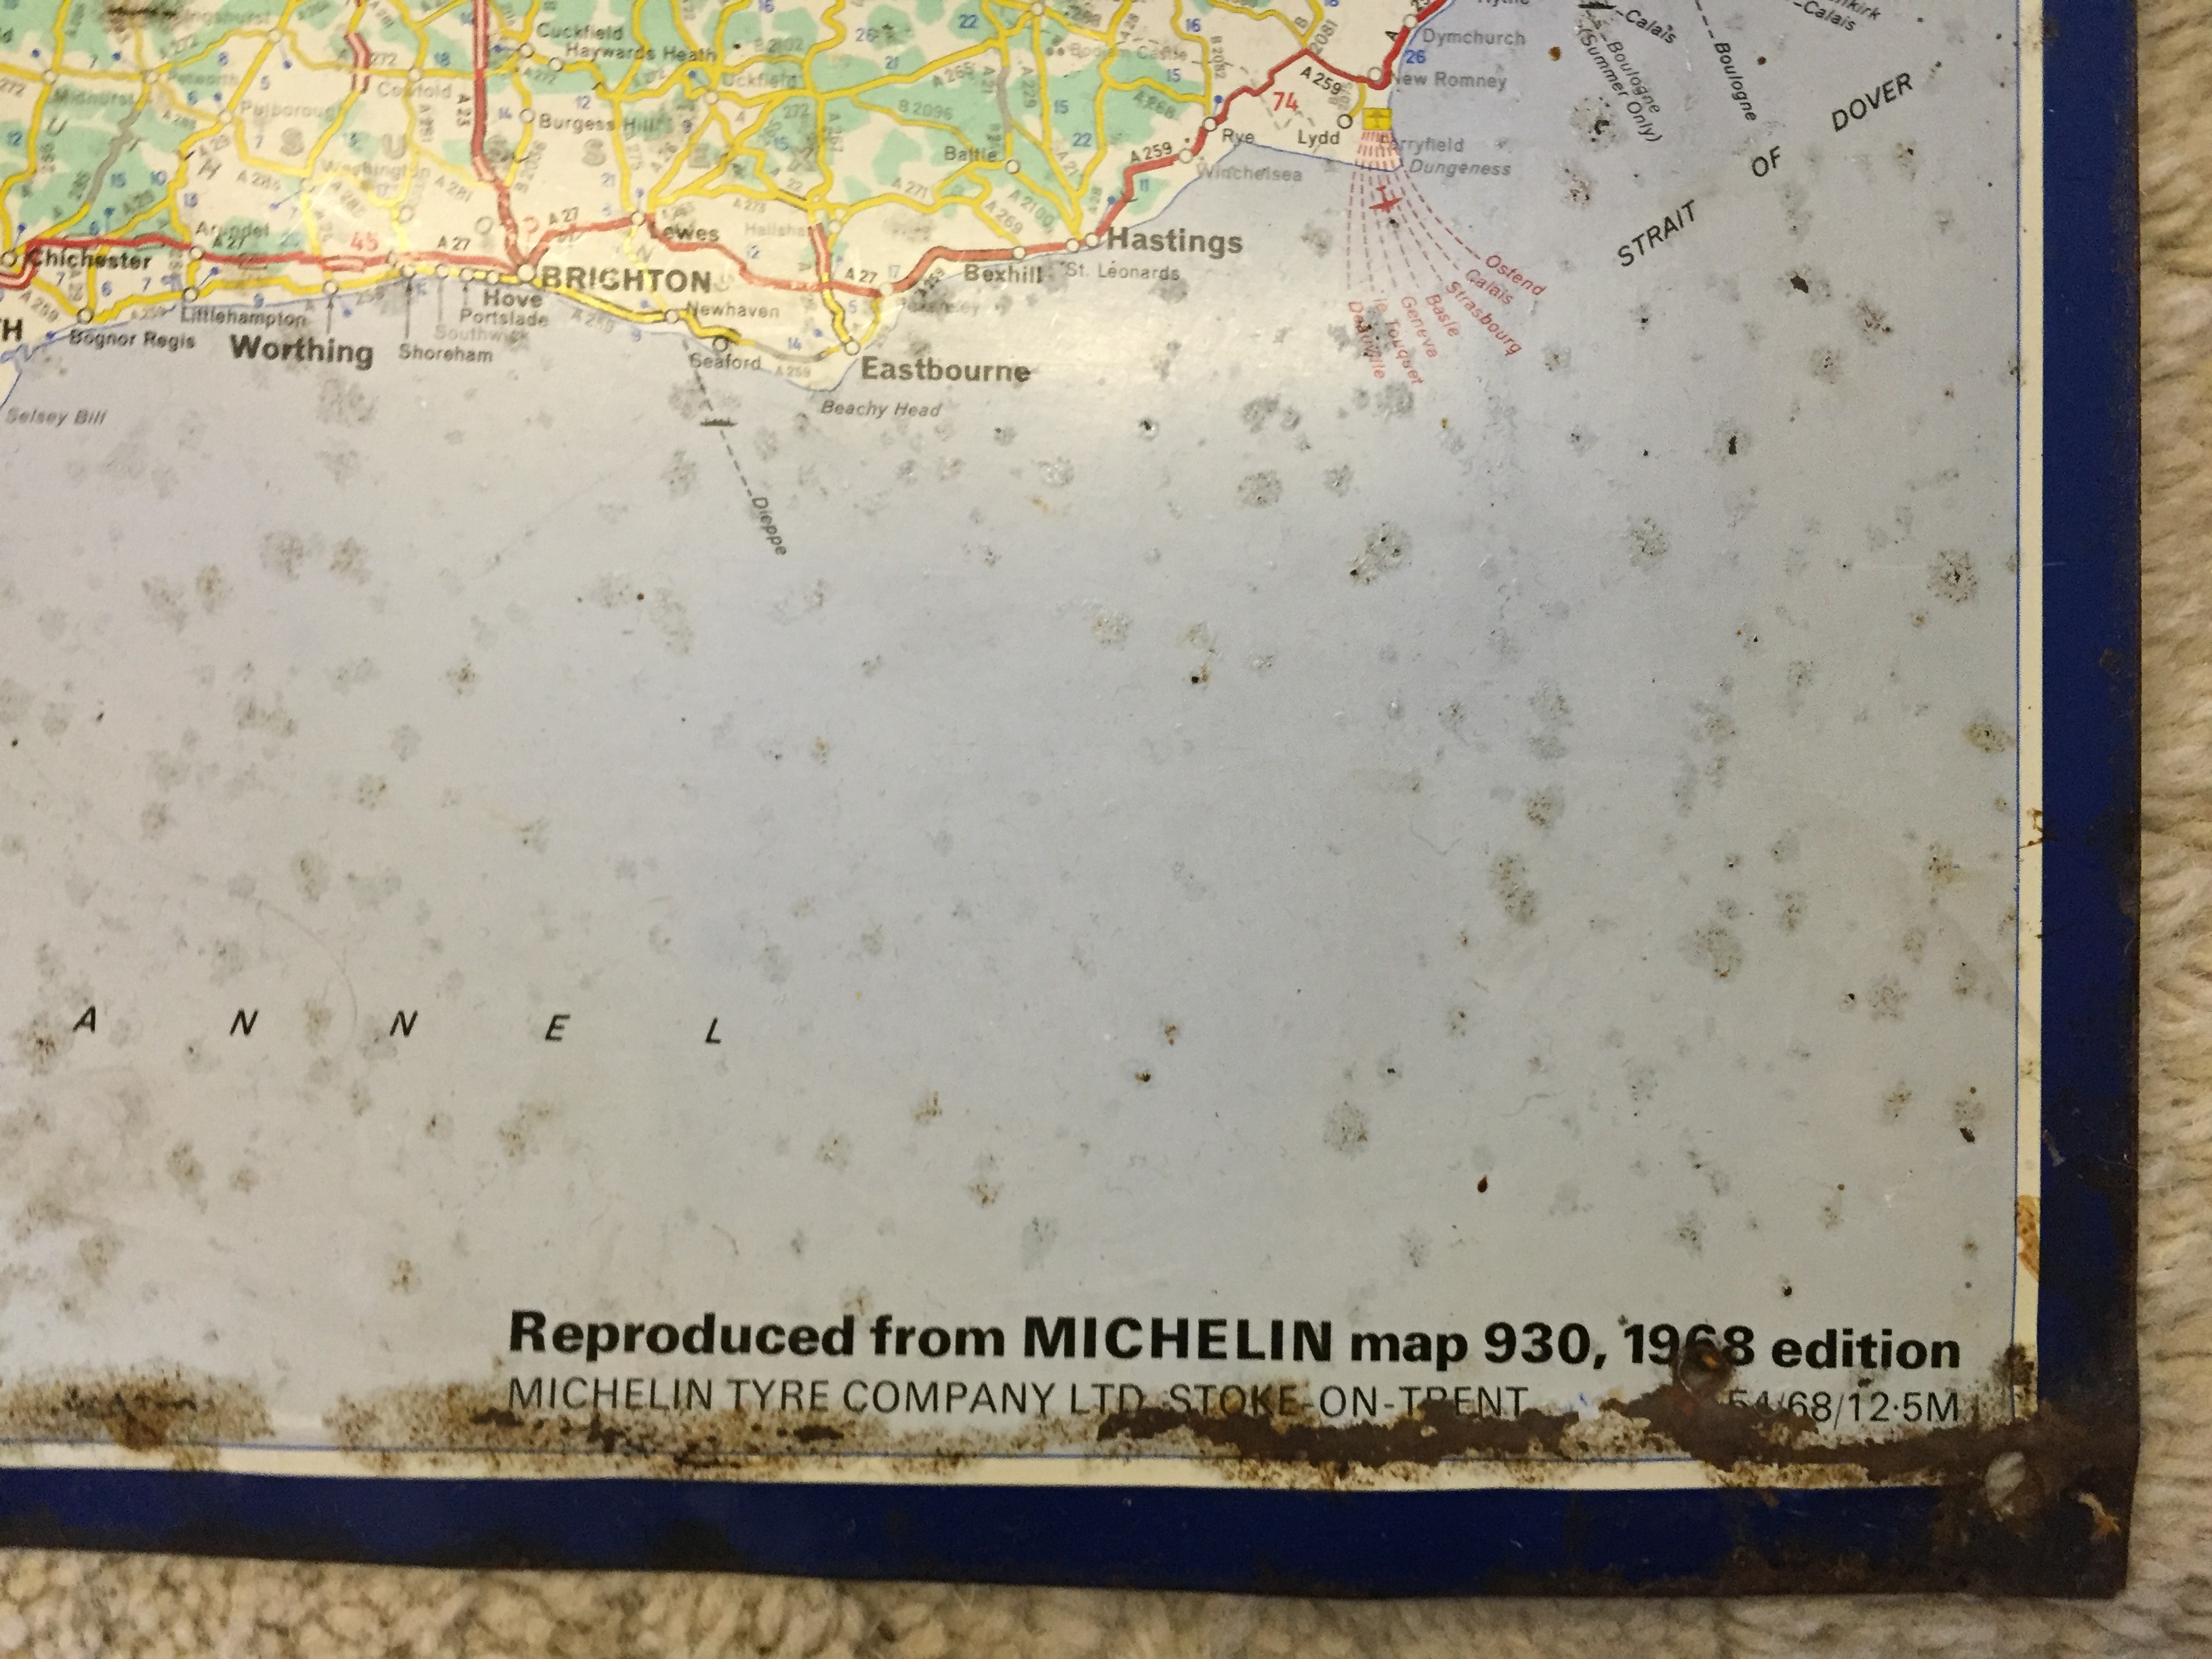 A 1968 Michelin road map. - Image 2 of 3